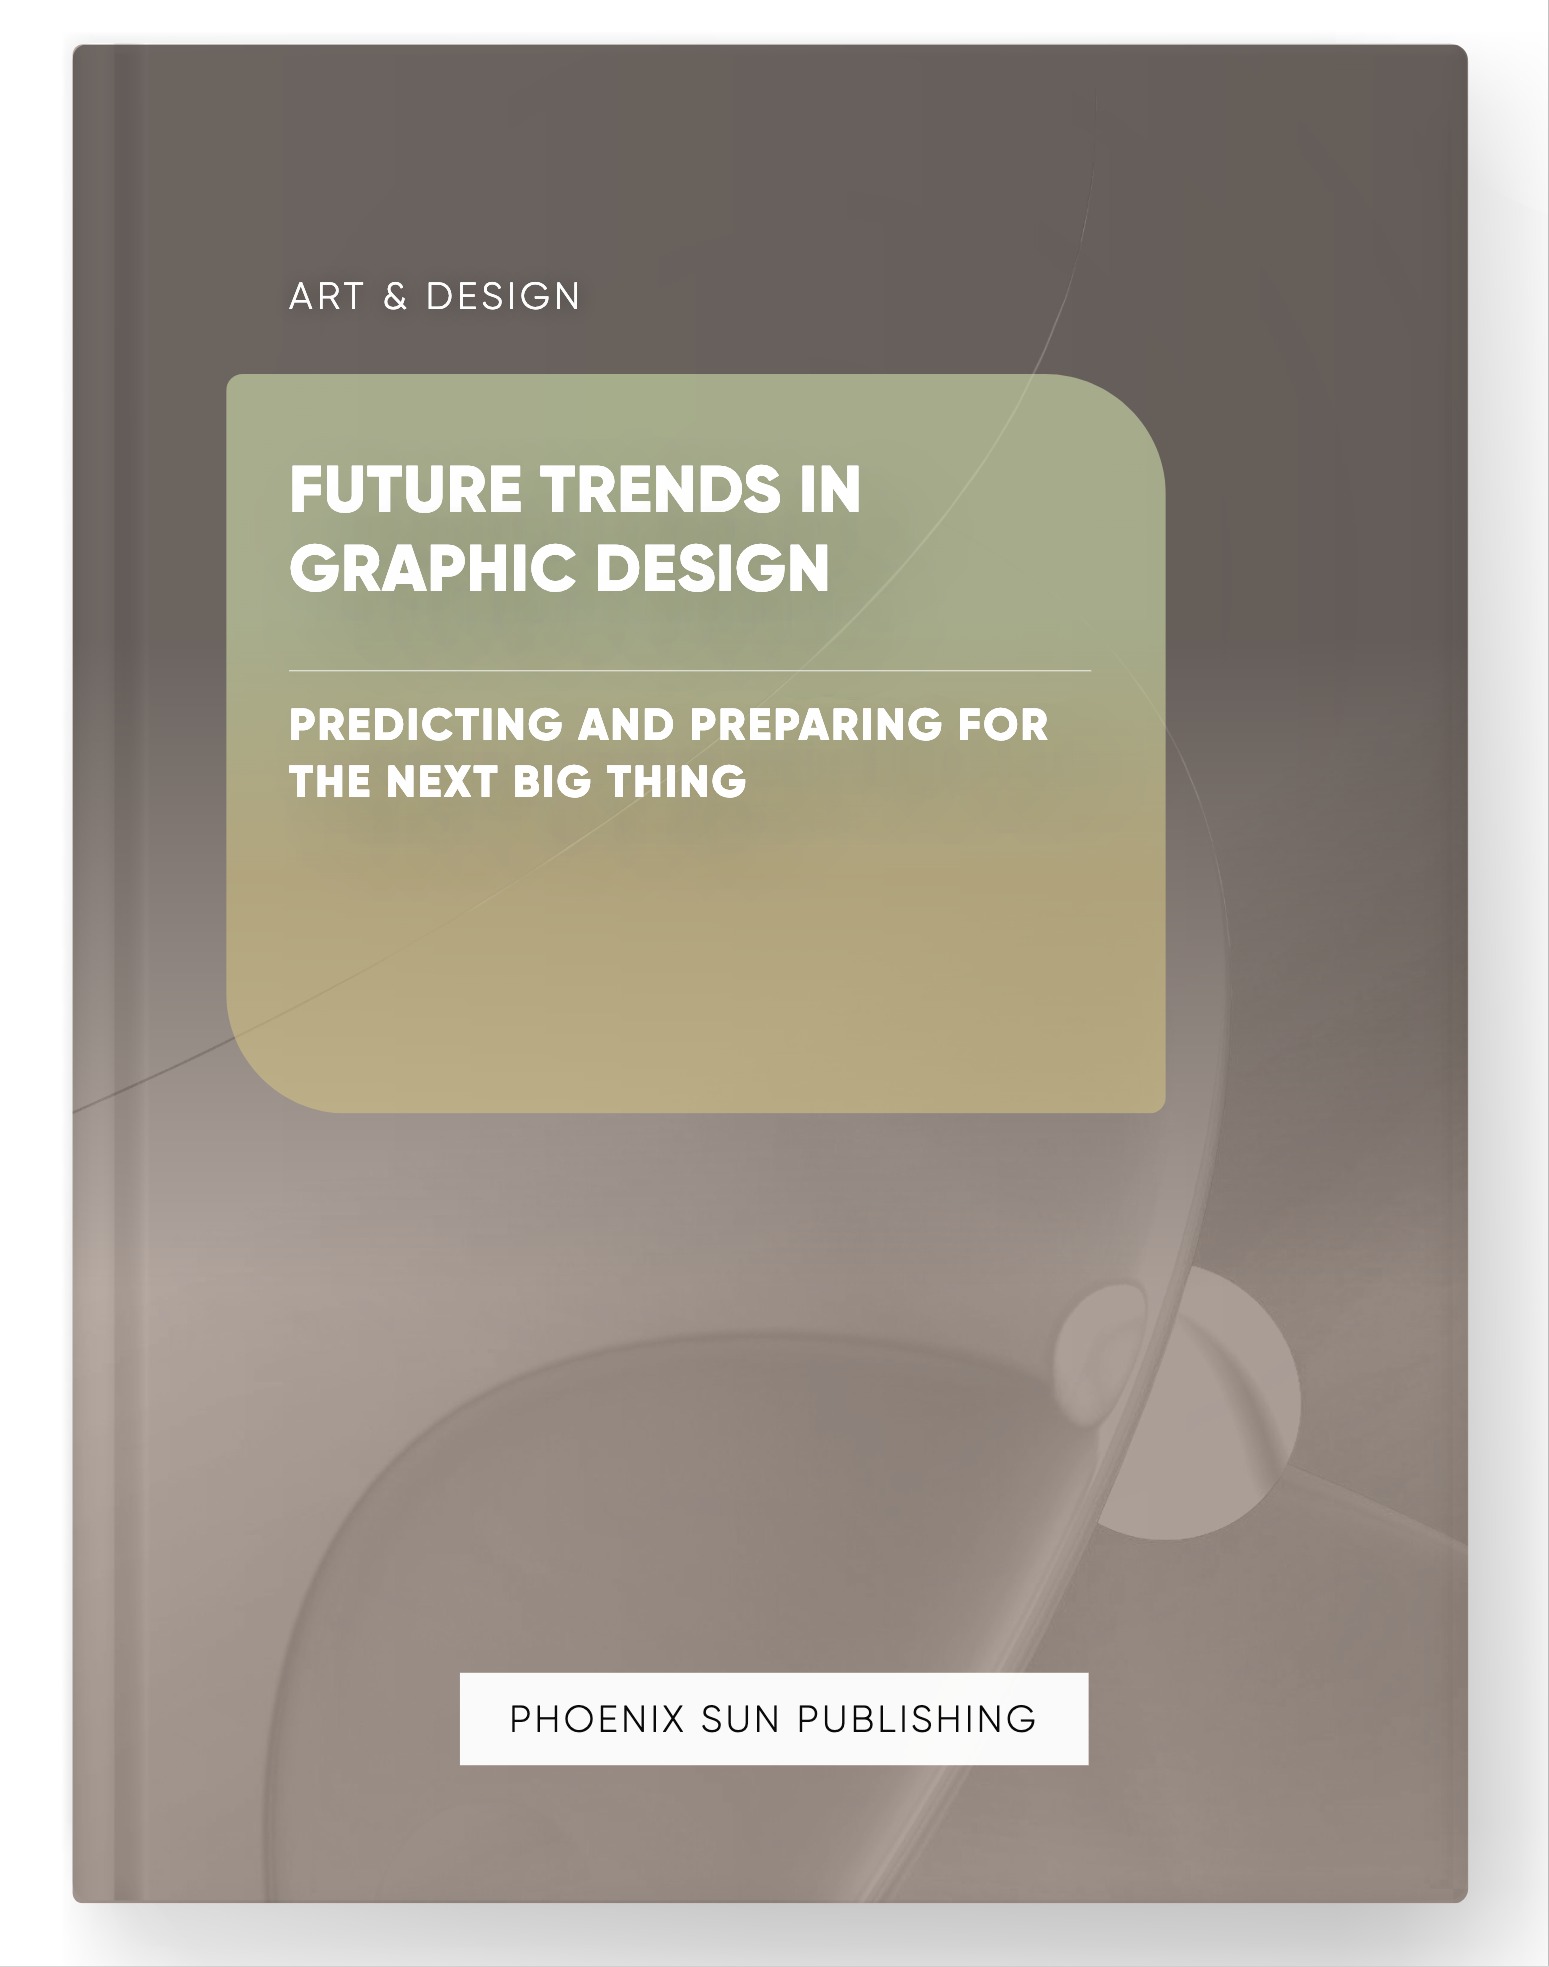 Future Trends in Graphic Design – Predicting and Preparing for the Next Big Thing